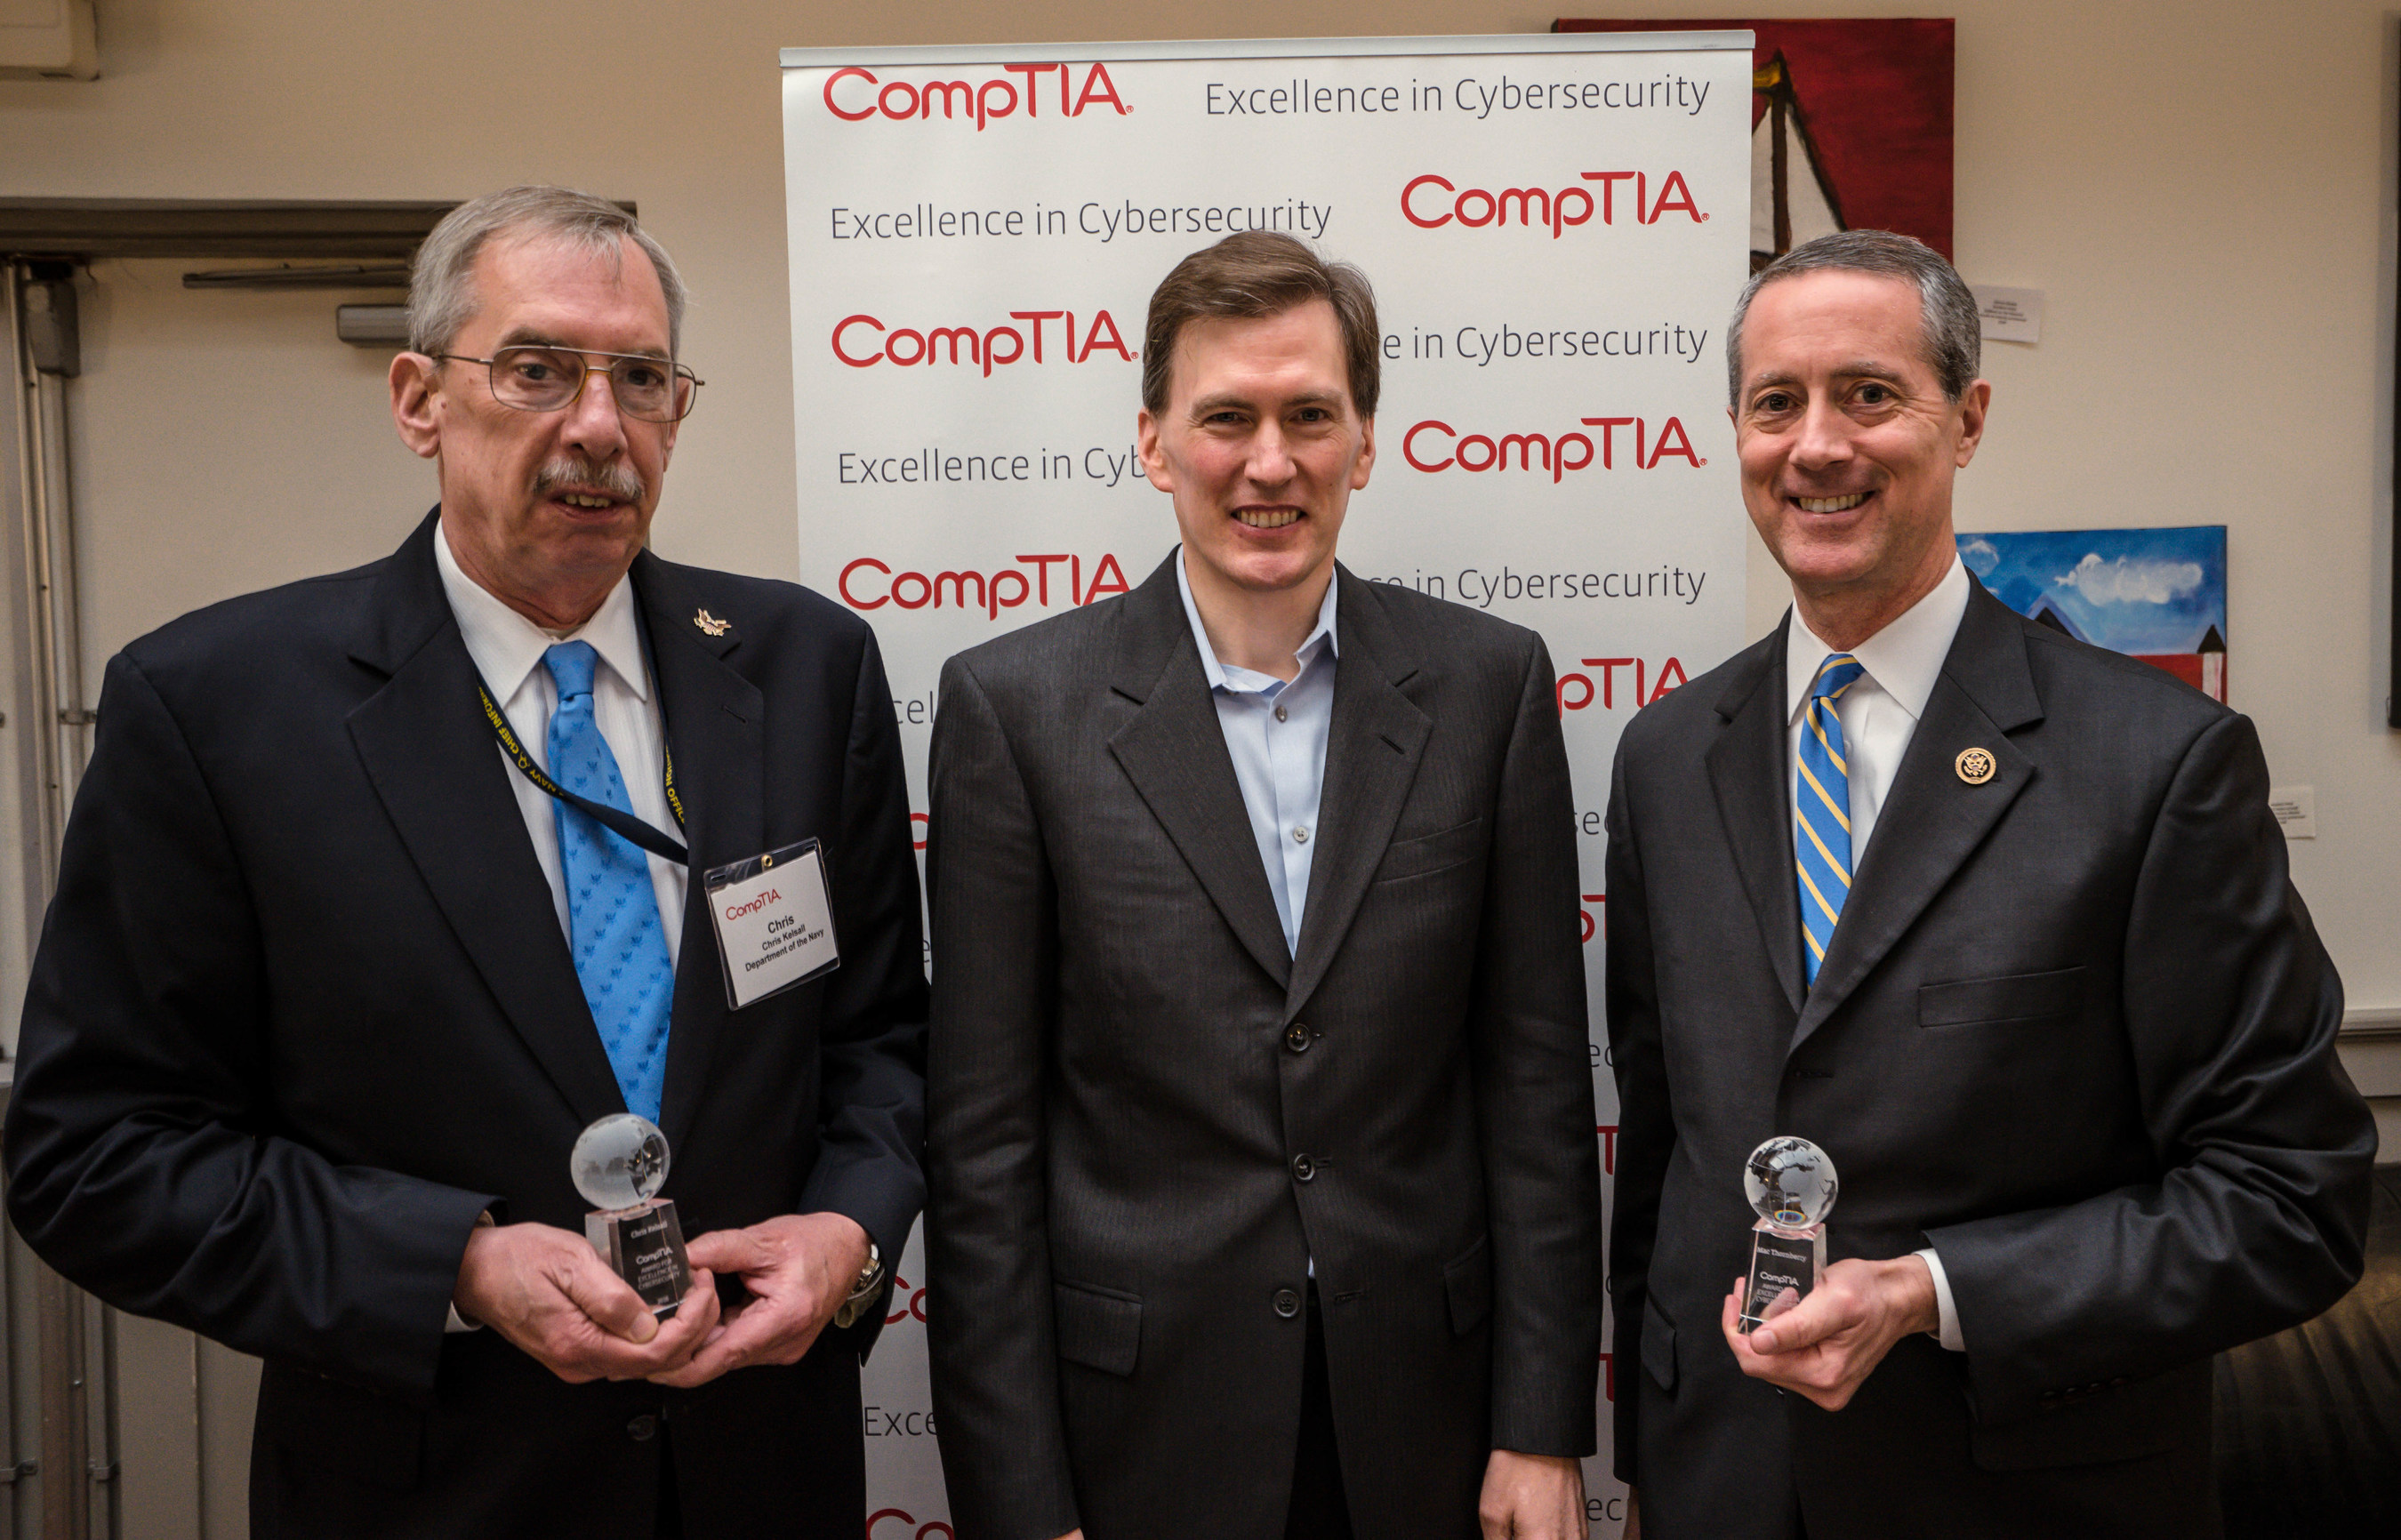 A Texas congressman and a federal agency program manager who have promoted the wise use of federal dollars to improve the cybersecurity skills of those who work for the U.S. government were honored Tuesday by the Computing Technology Industry Association. The 2016 CompTIA Excellence in Cybersecurity awards were presented to Chris Kelsall (left), Branch Head, Cyber Workforce, U.S. Navy, and Congressman Mac Thornberry (TX-13) (right), Chairman House Armed Services Committee. Todd Thibodeaux (center), president and CEO of CompTIA, presented the awards during a ceremony in Washington, D.C.